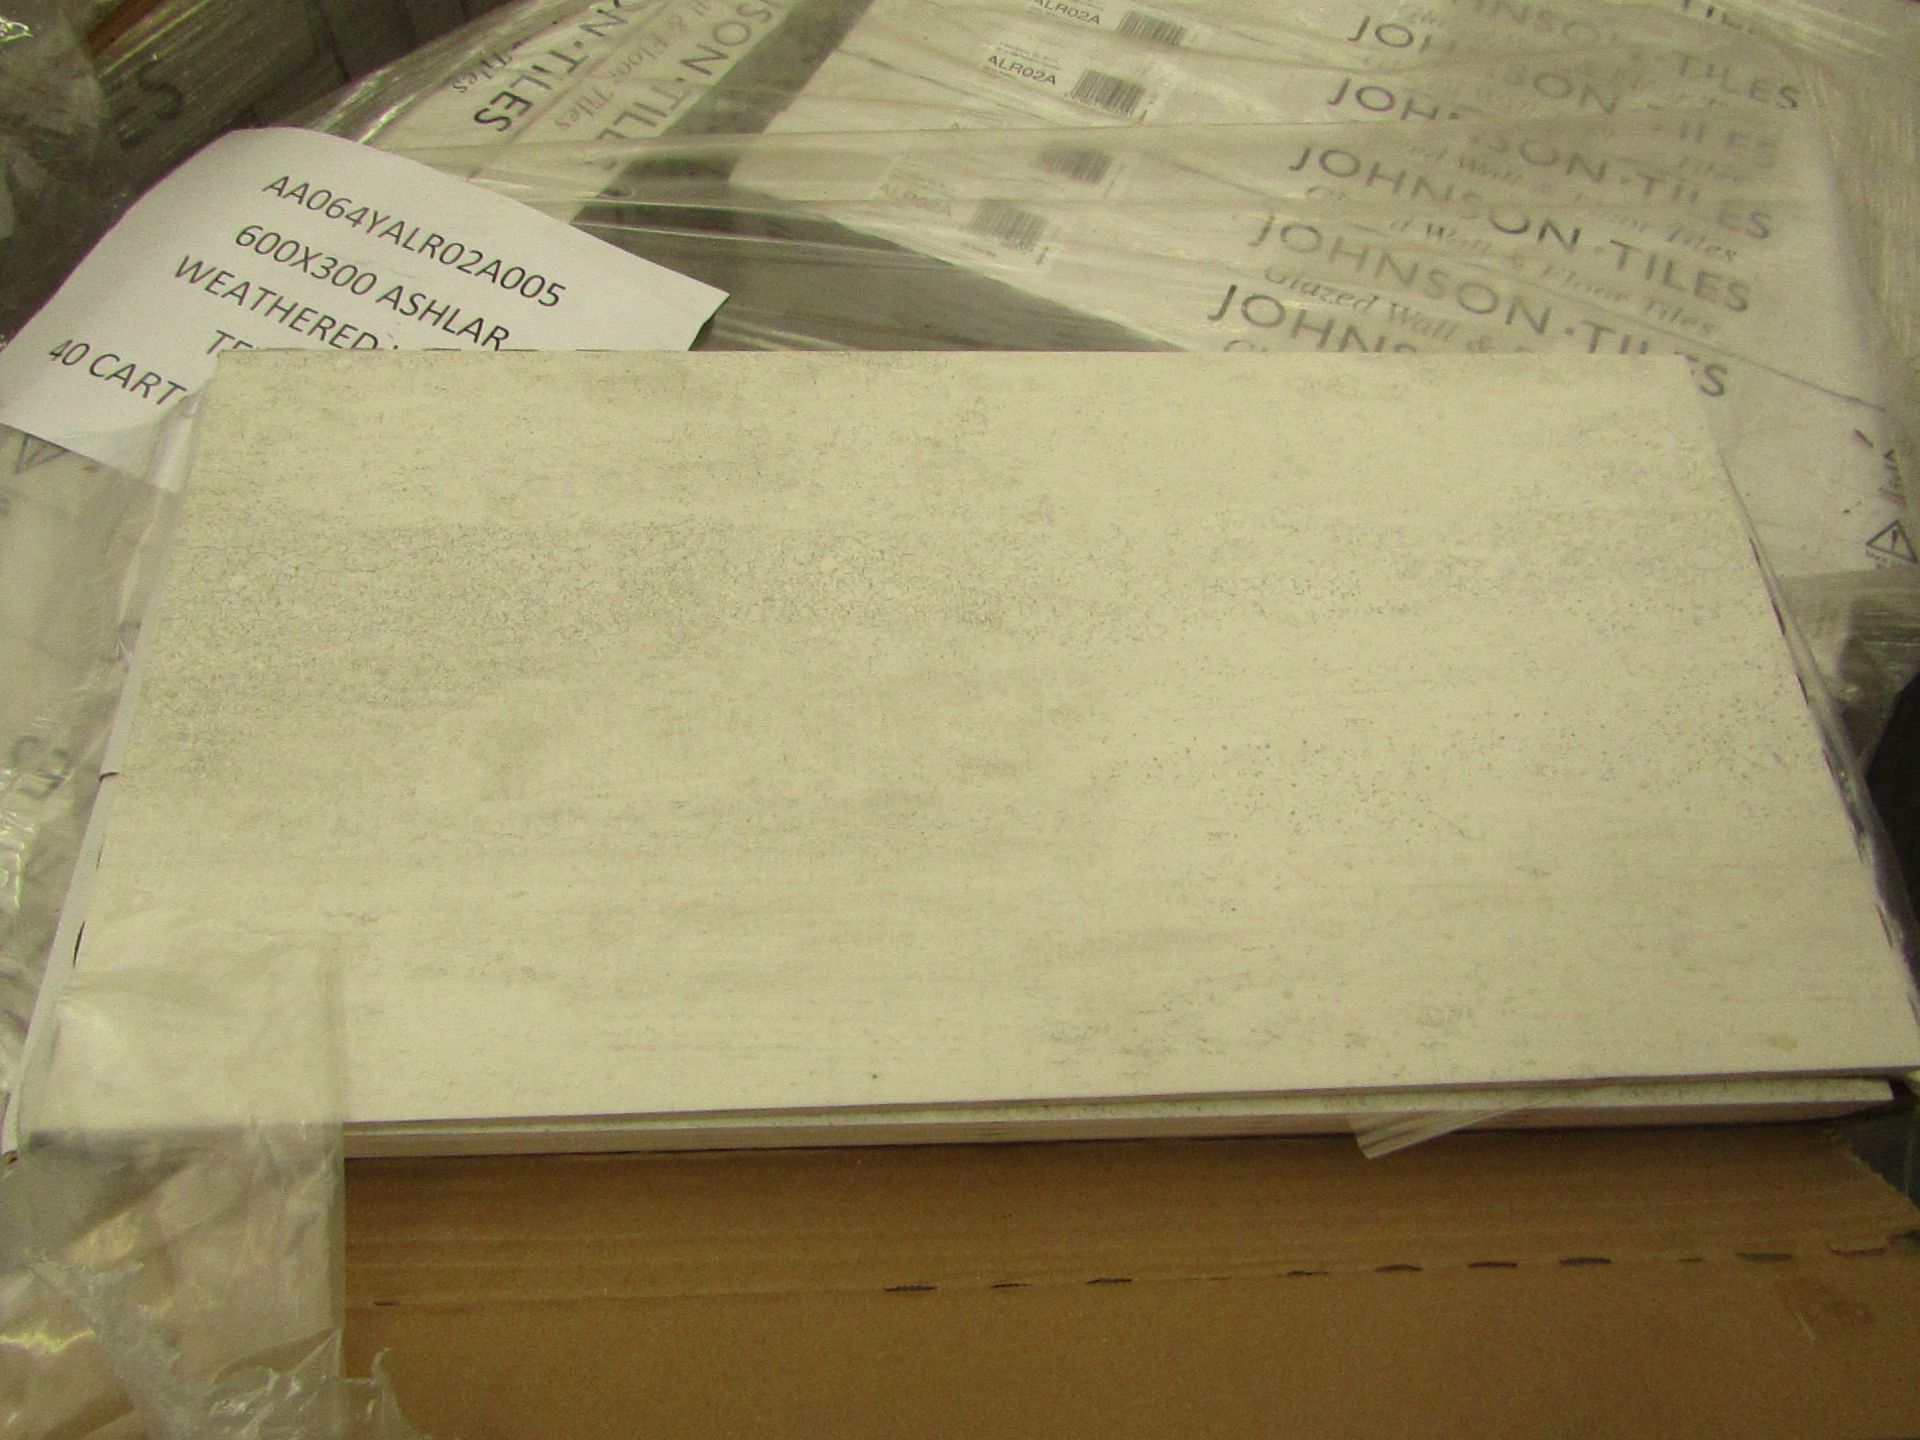 10x Packs of 5 Ashlar White 300x600 wall and Floor Tiles By Johnsons, New, the RRP per pack is 34.99